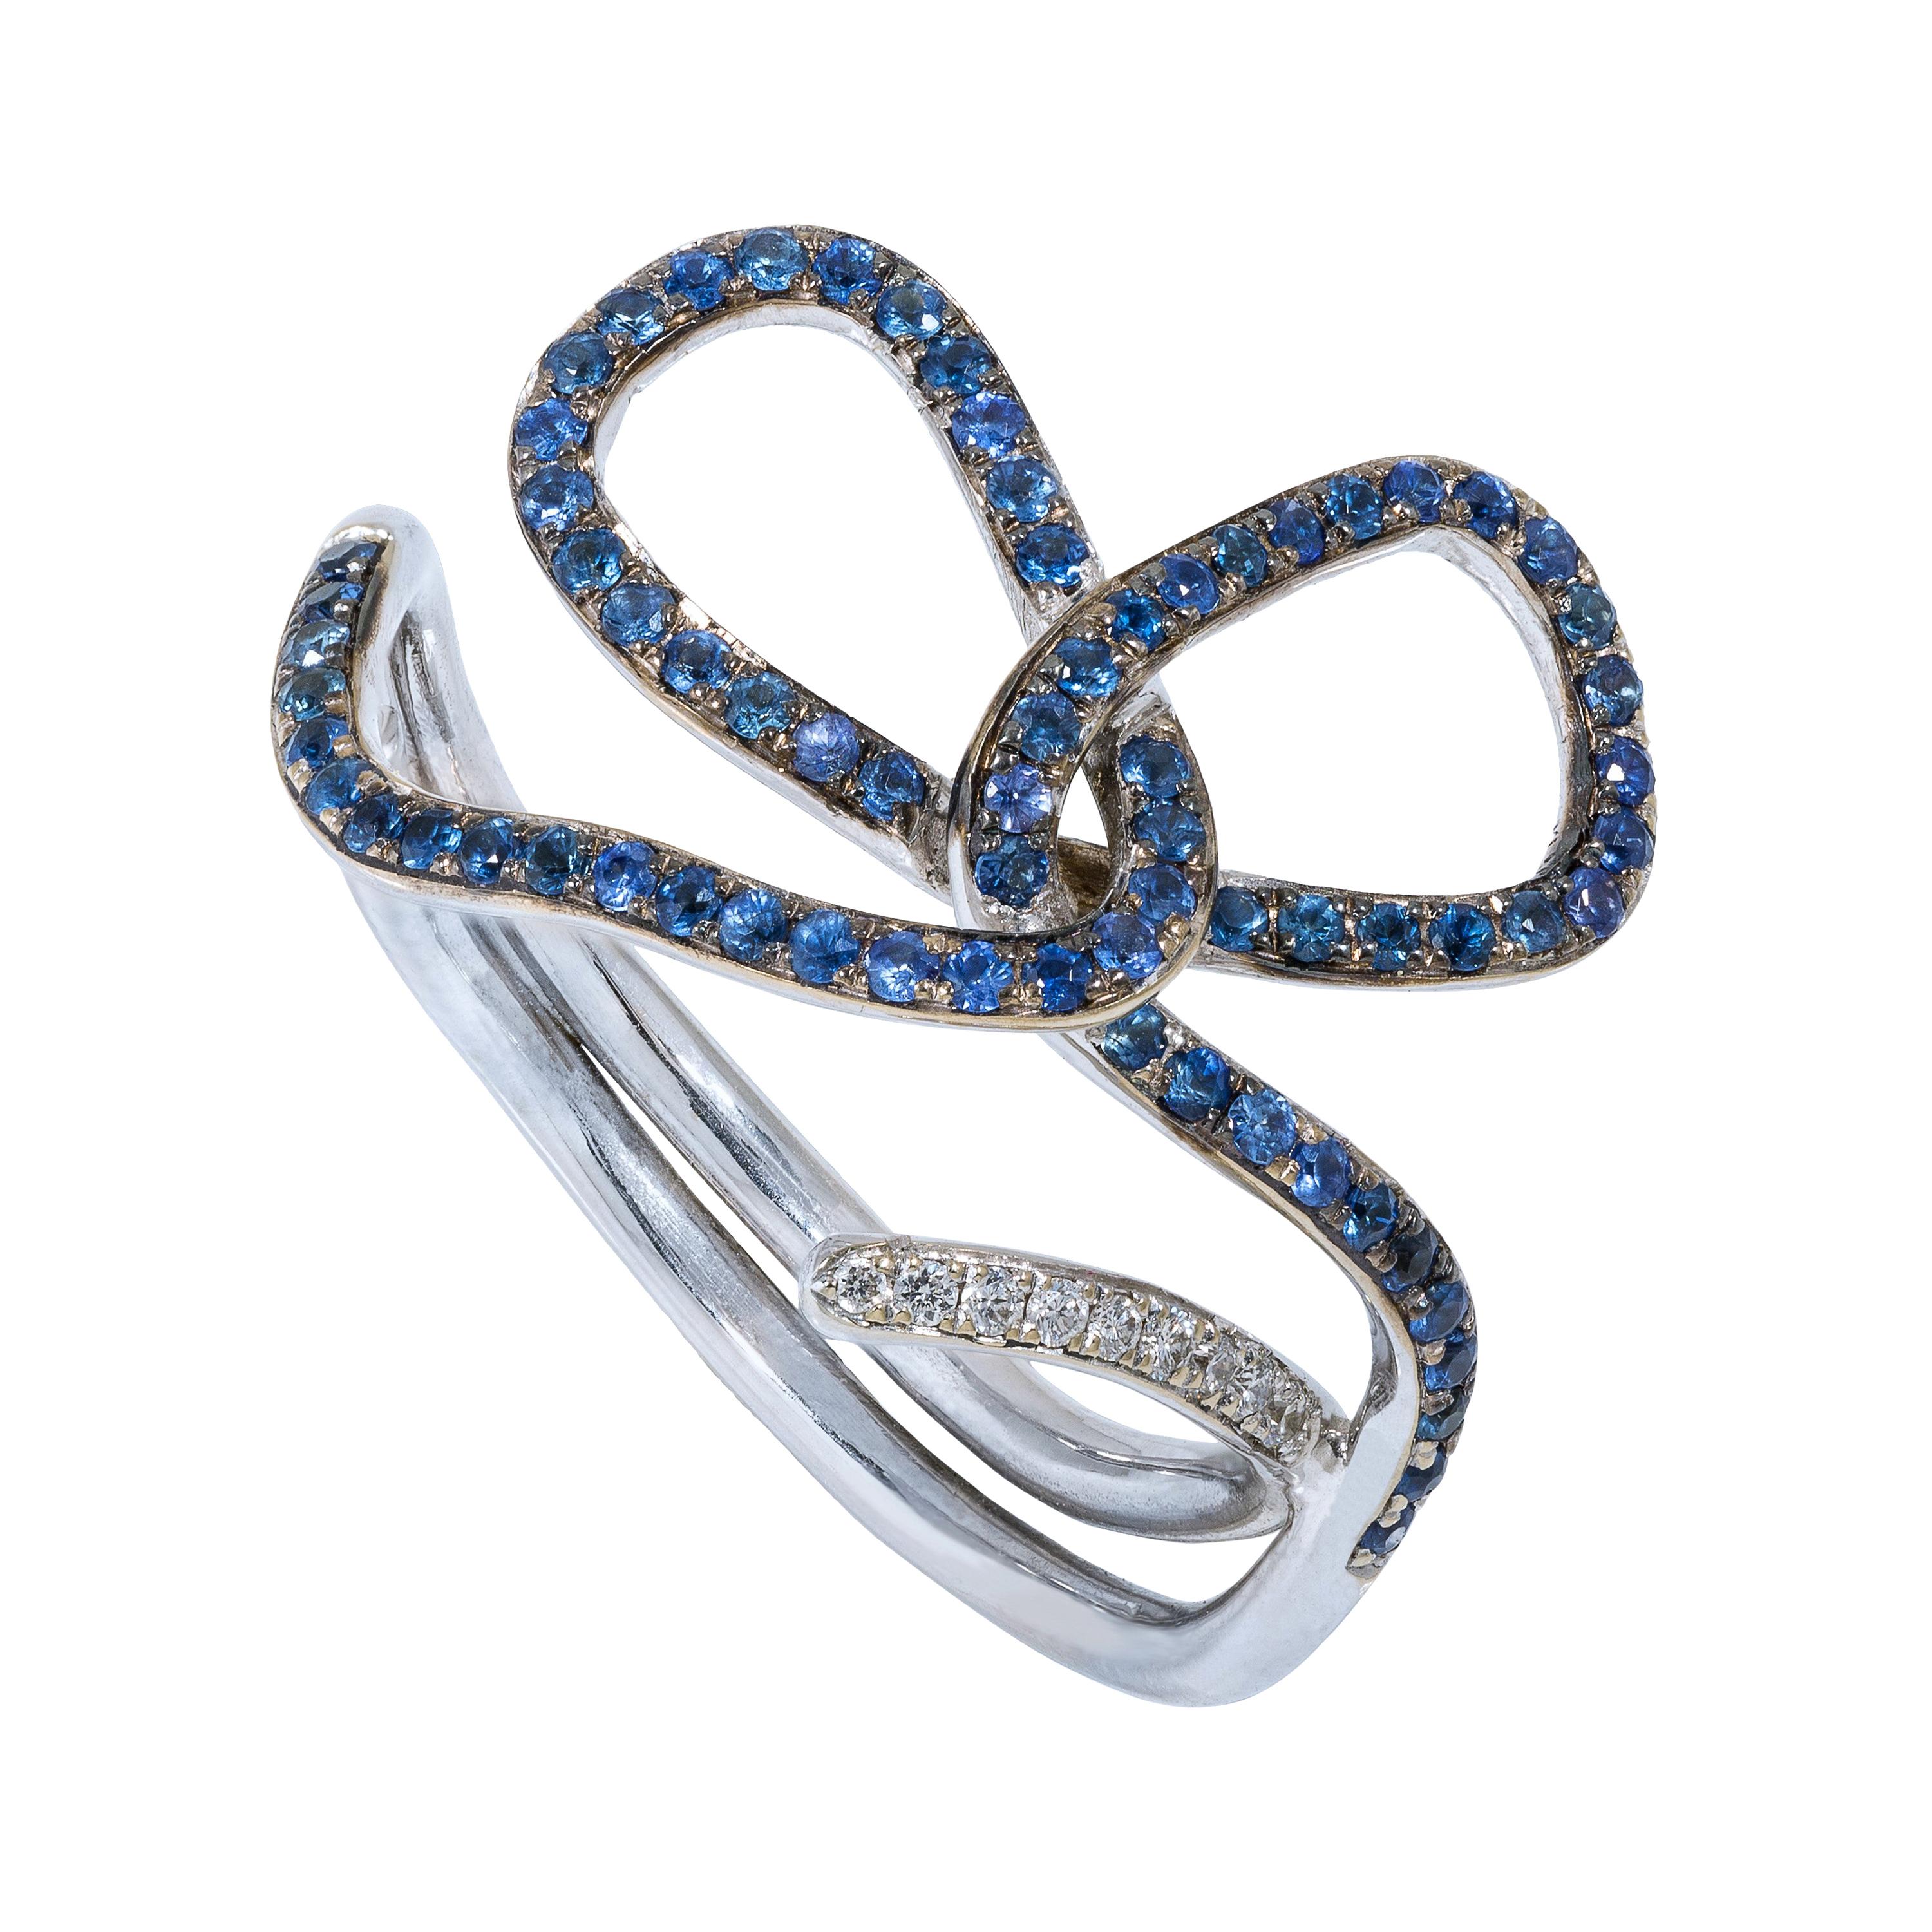 Rosior one-off Blue Sapphire and Diamond "Ribbon" Ring set in White Gold